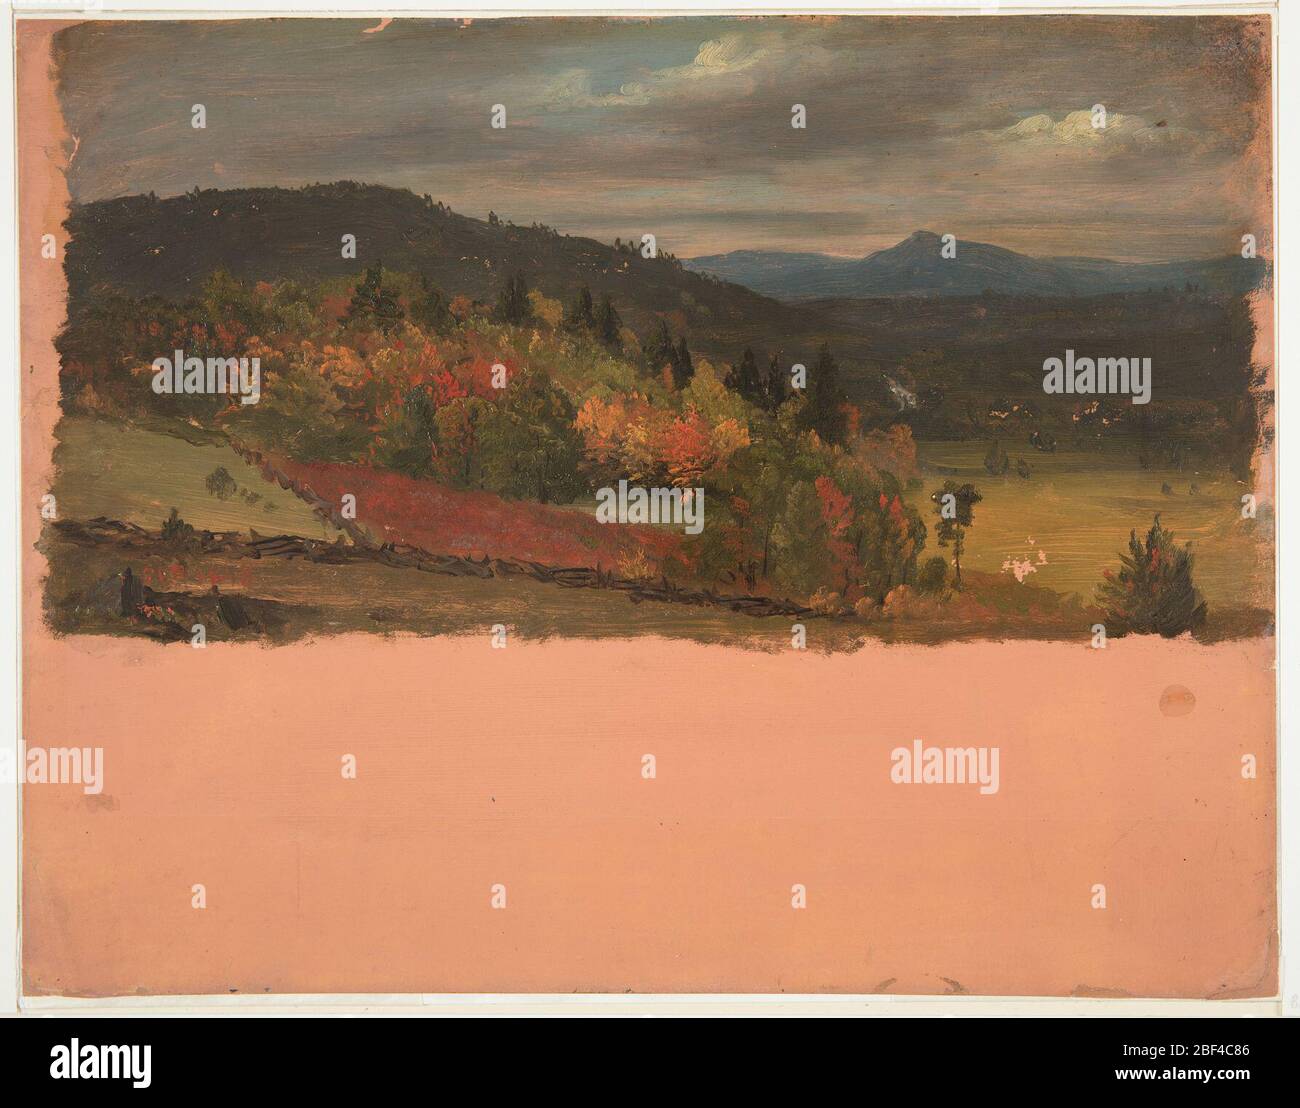 Maine or Stockbridge Mass view. View into a valley which is bordered by hills at left and in the middle plane. A mountain range is in the right background. Cloudy sky. Woods are shown especially in the left middle plane. Log fences. Stock Photo